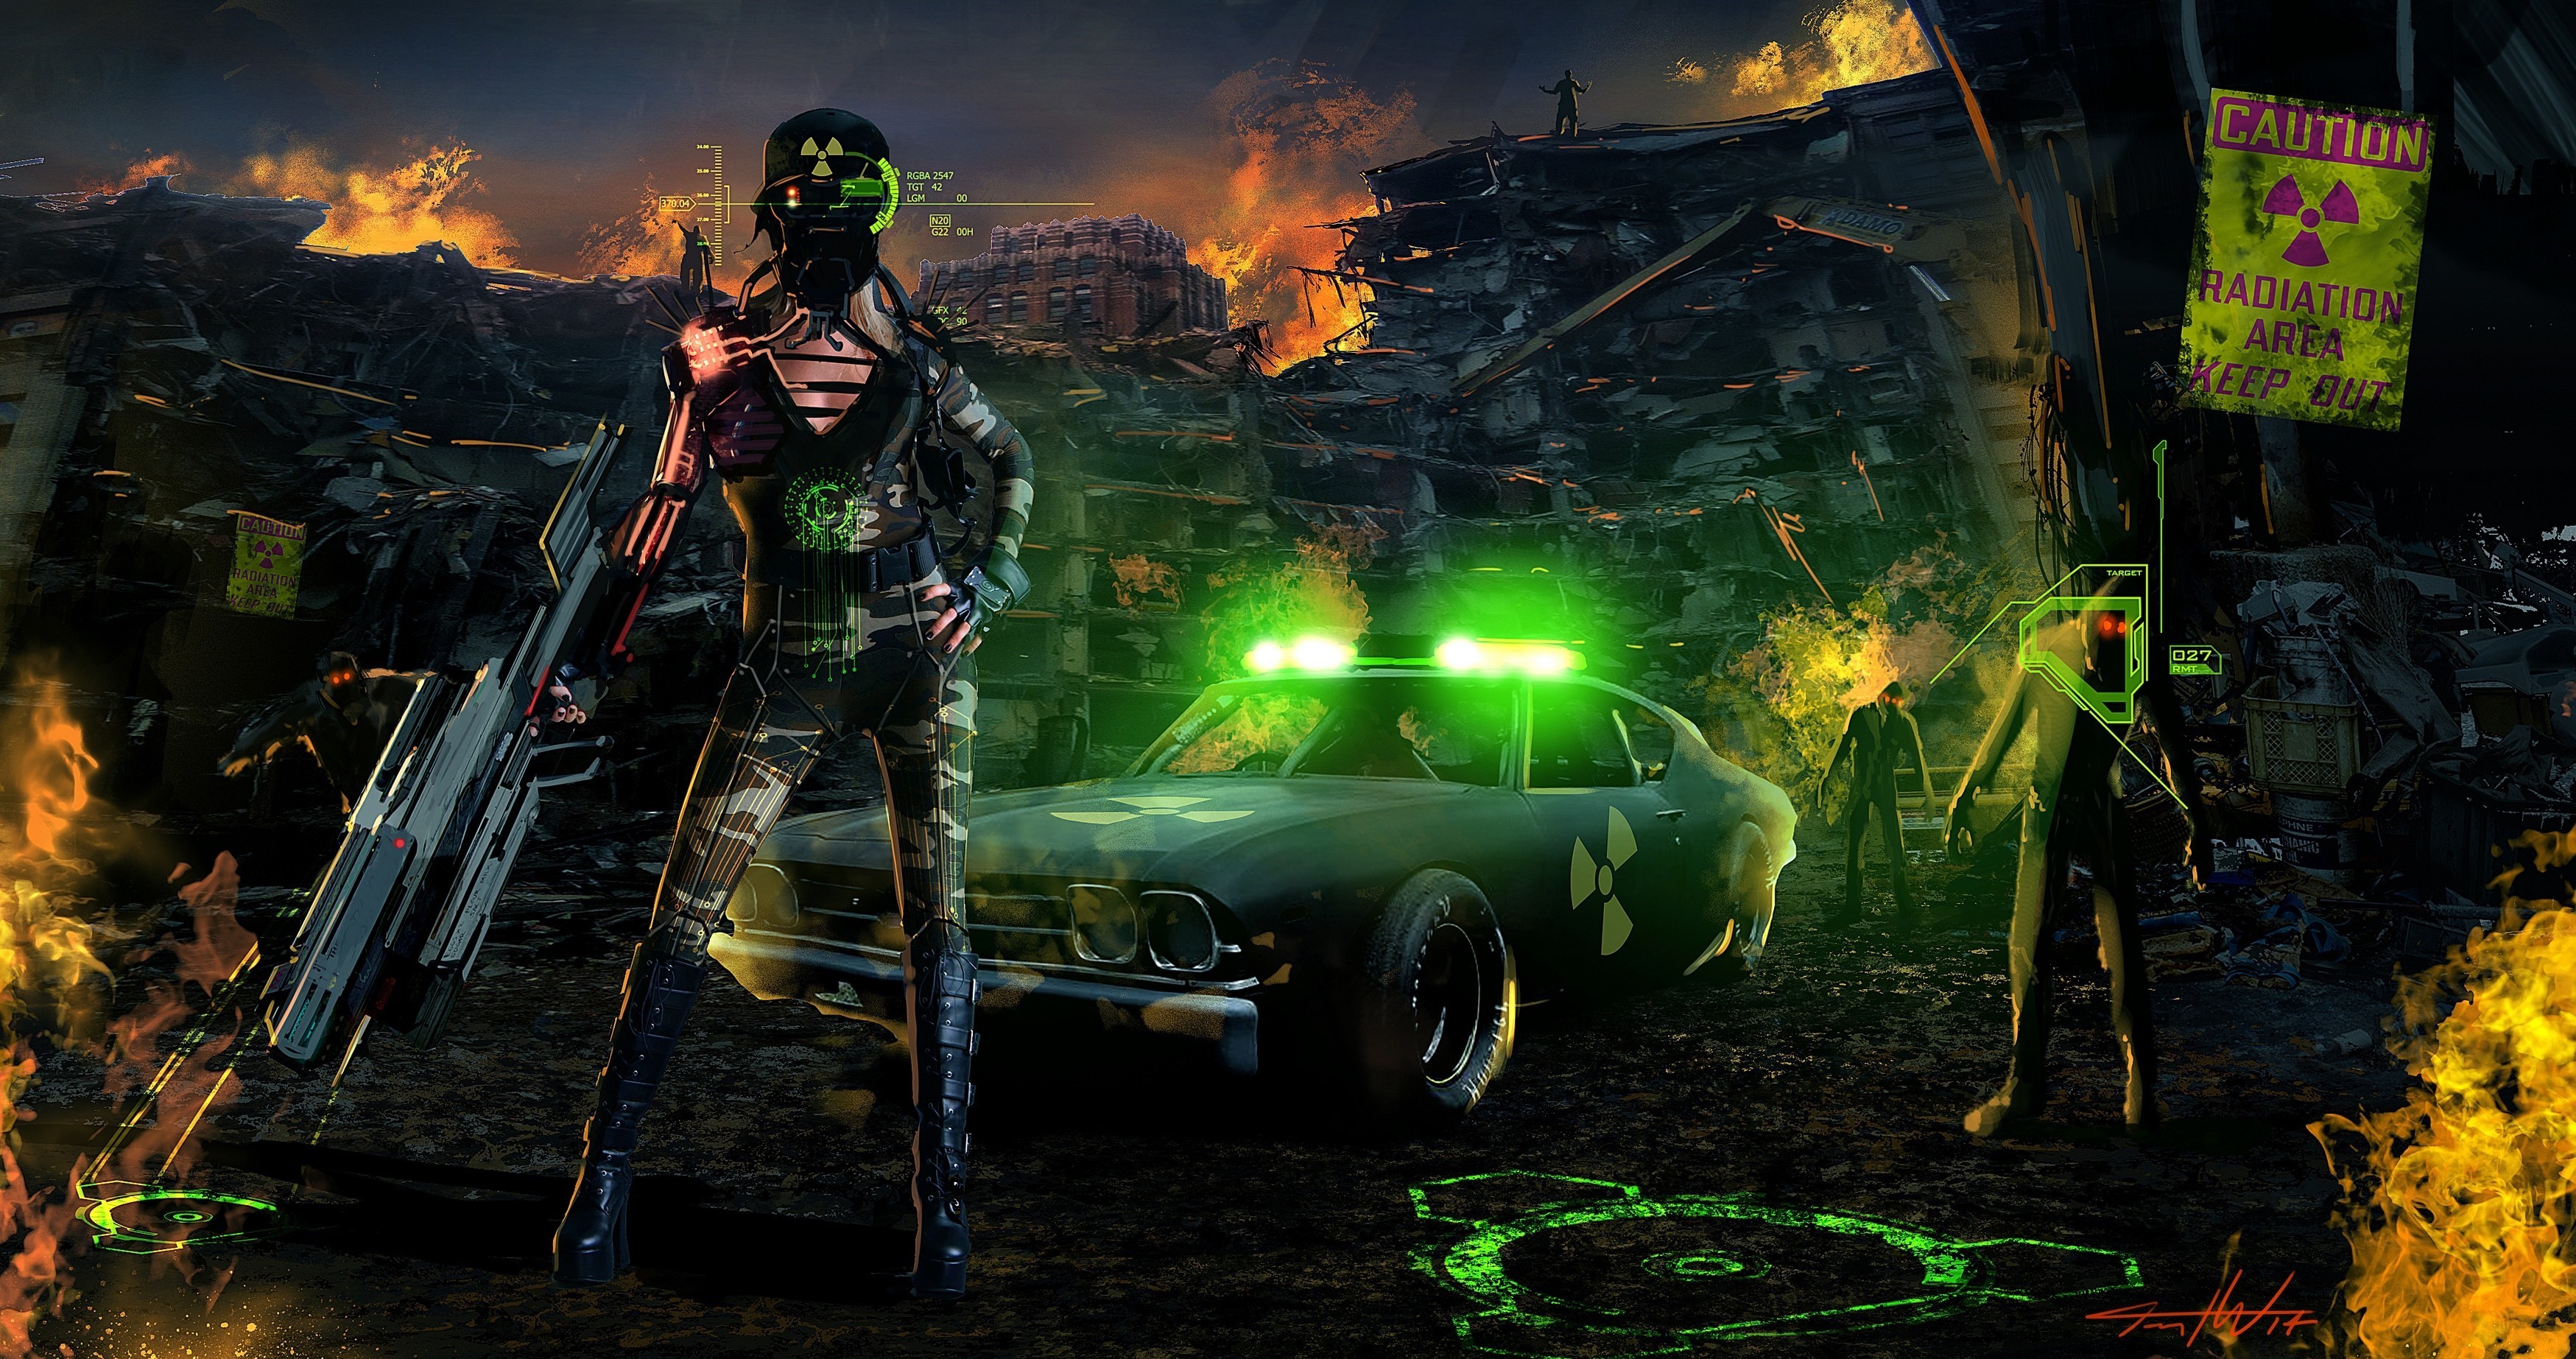 General 3498x1845 artwork digital art futuristic weapon car vehicle science fiction fire apocalyptic science fiction women girls with guns